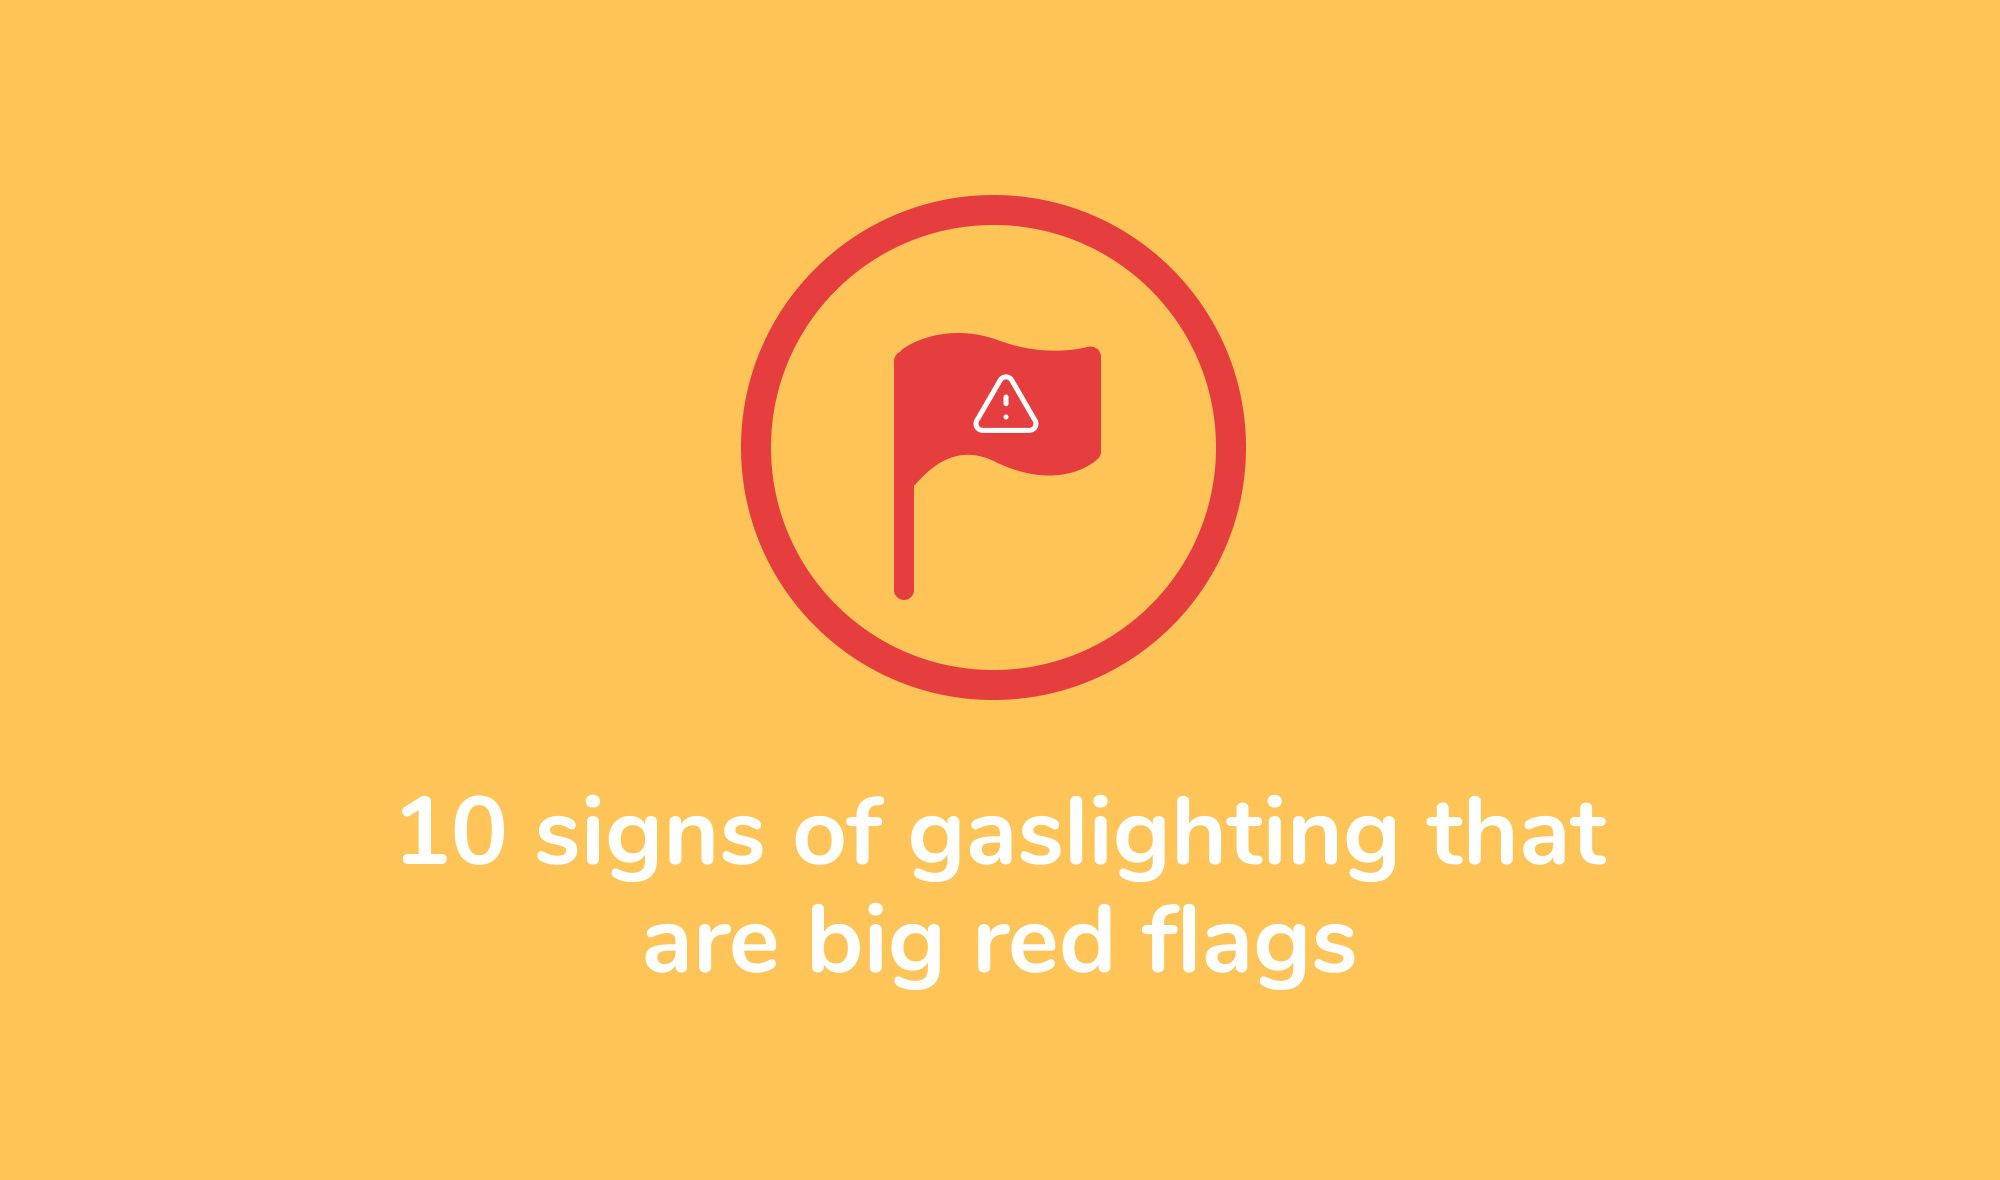 10 signs of gaslighting that are big red flags